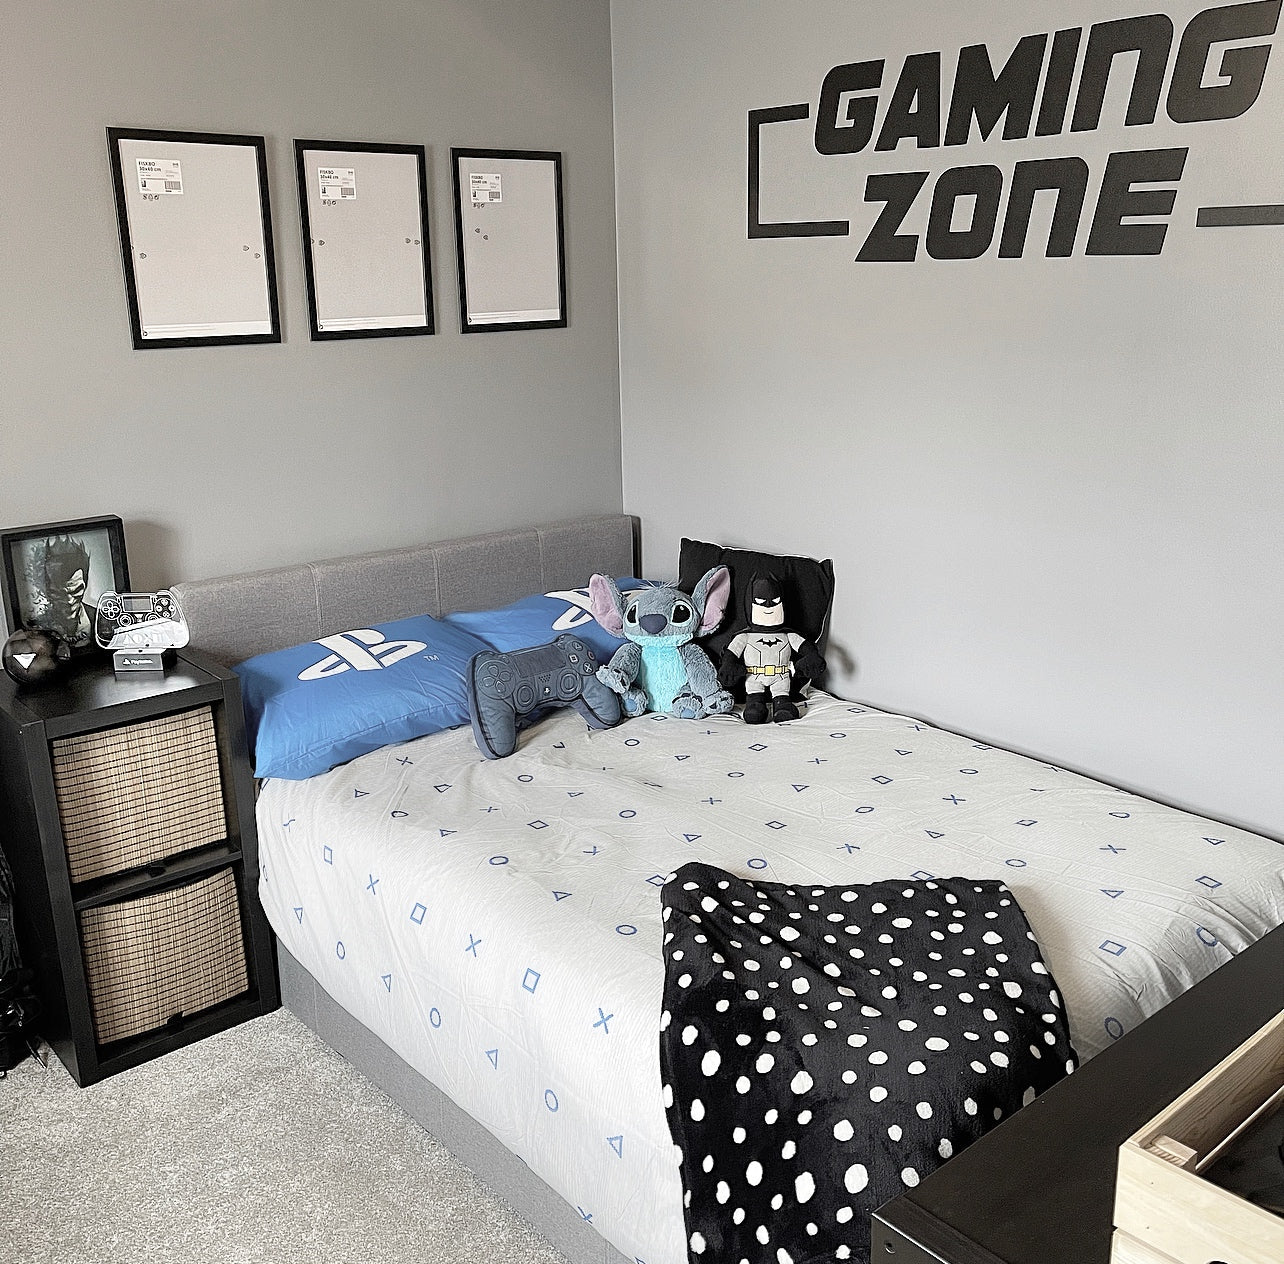 Large Gaming Zone Wall Words - Cute as a Button by Laura